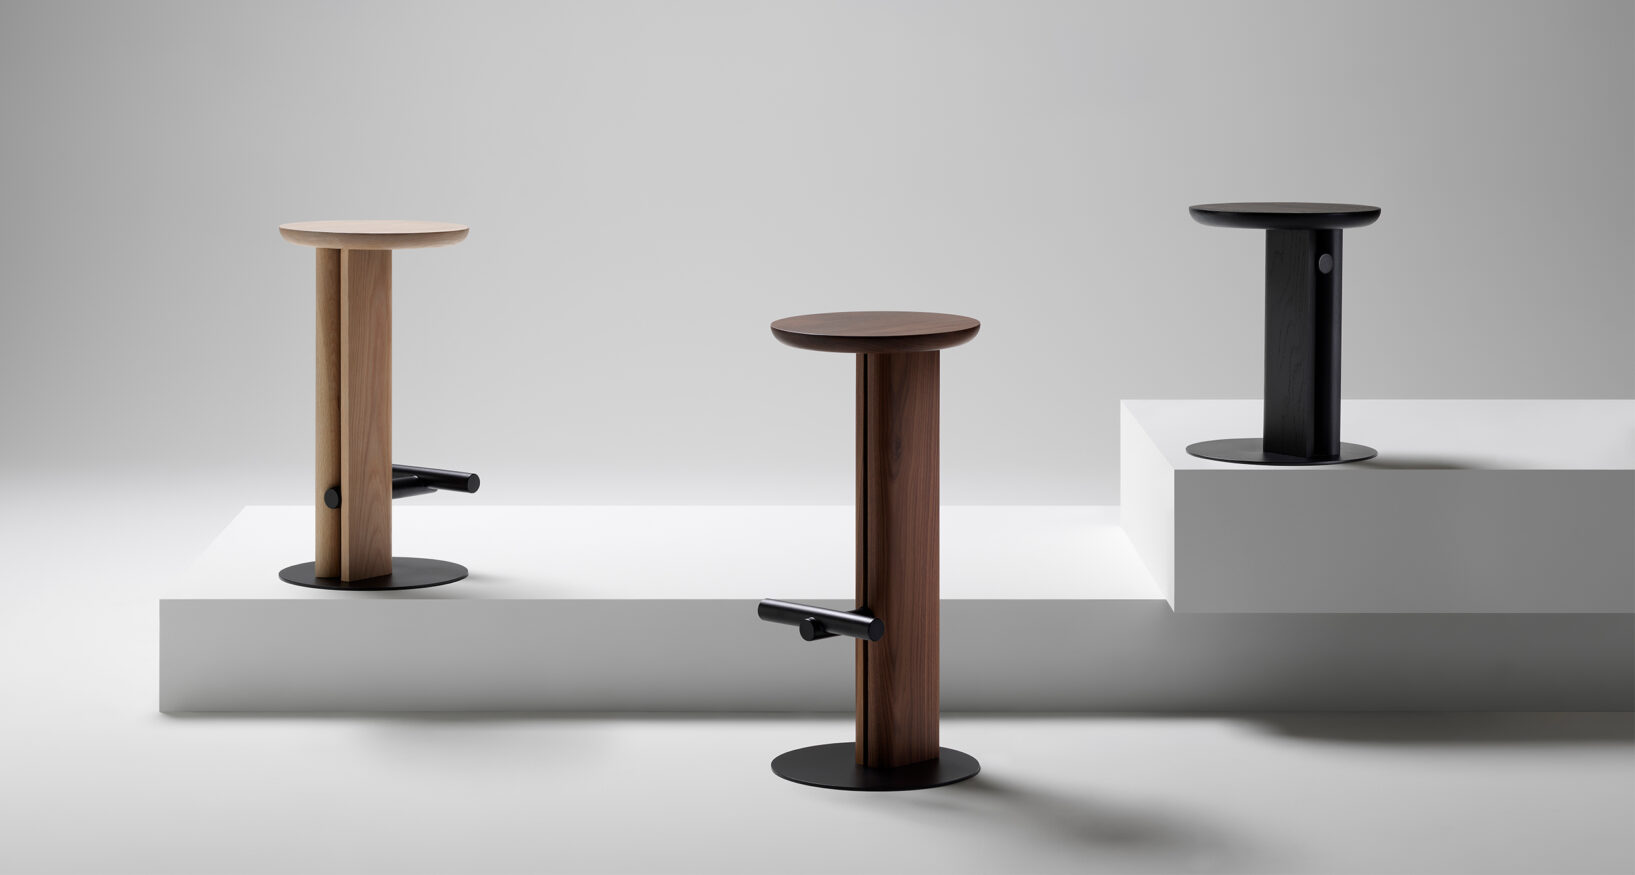 Rook Stools in various sizes and finishes